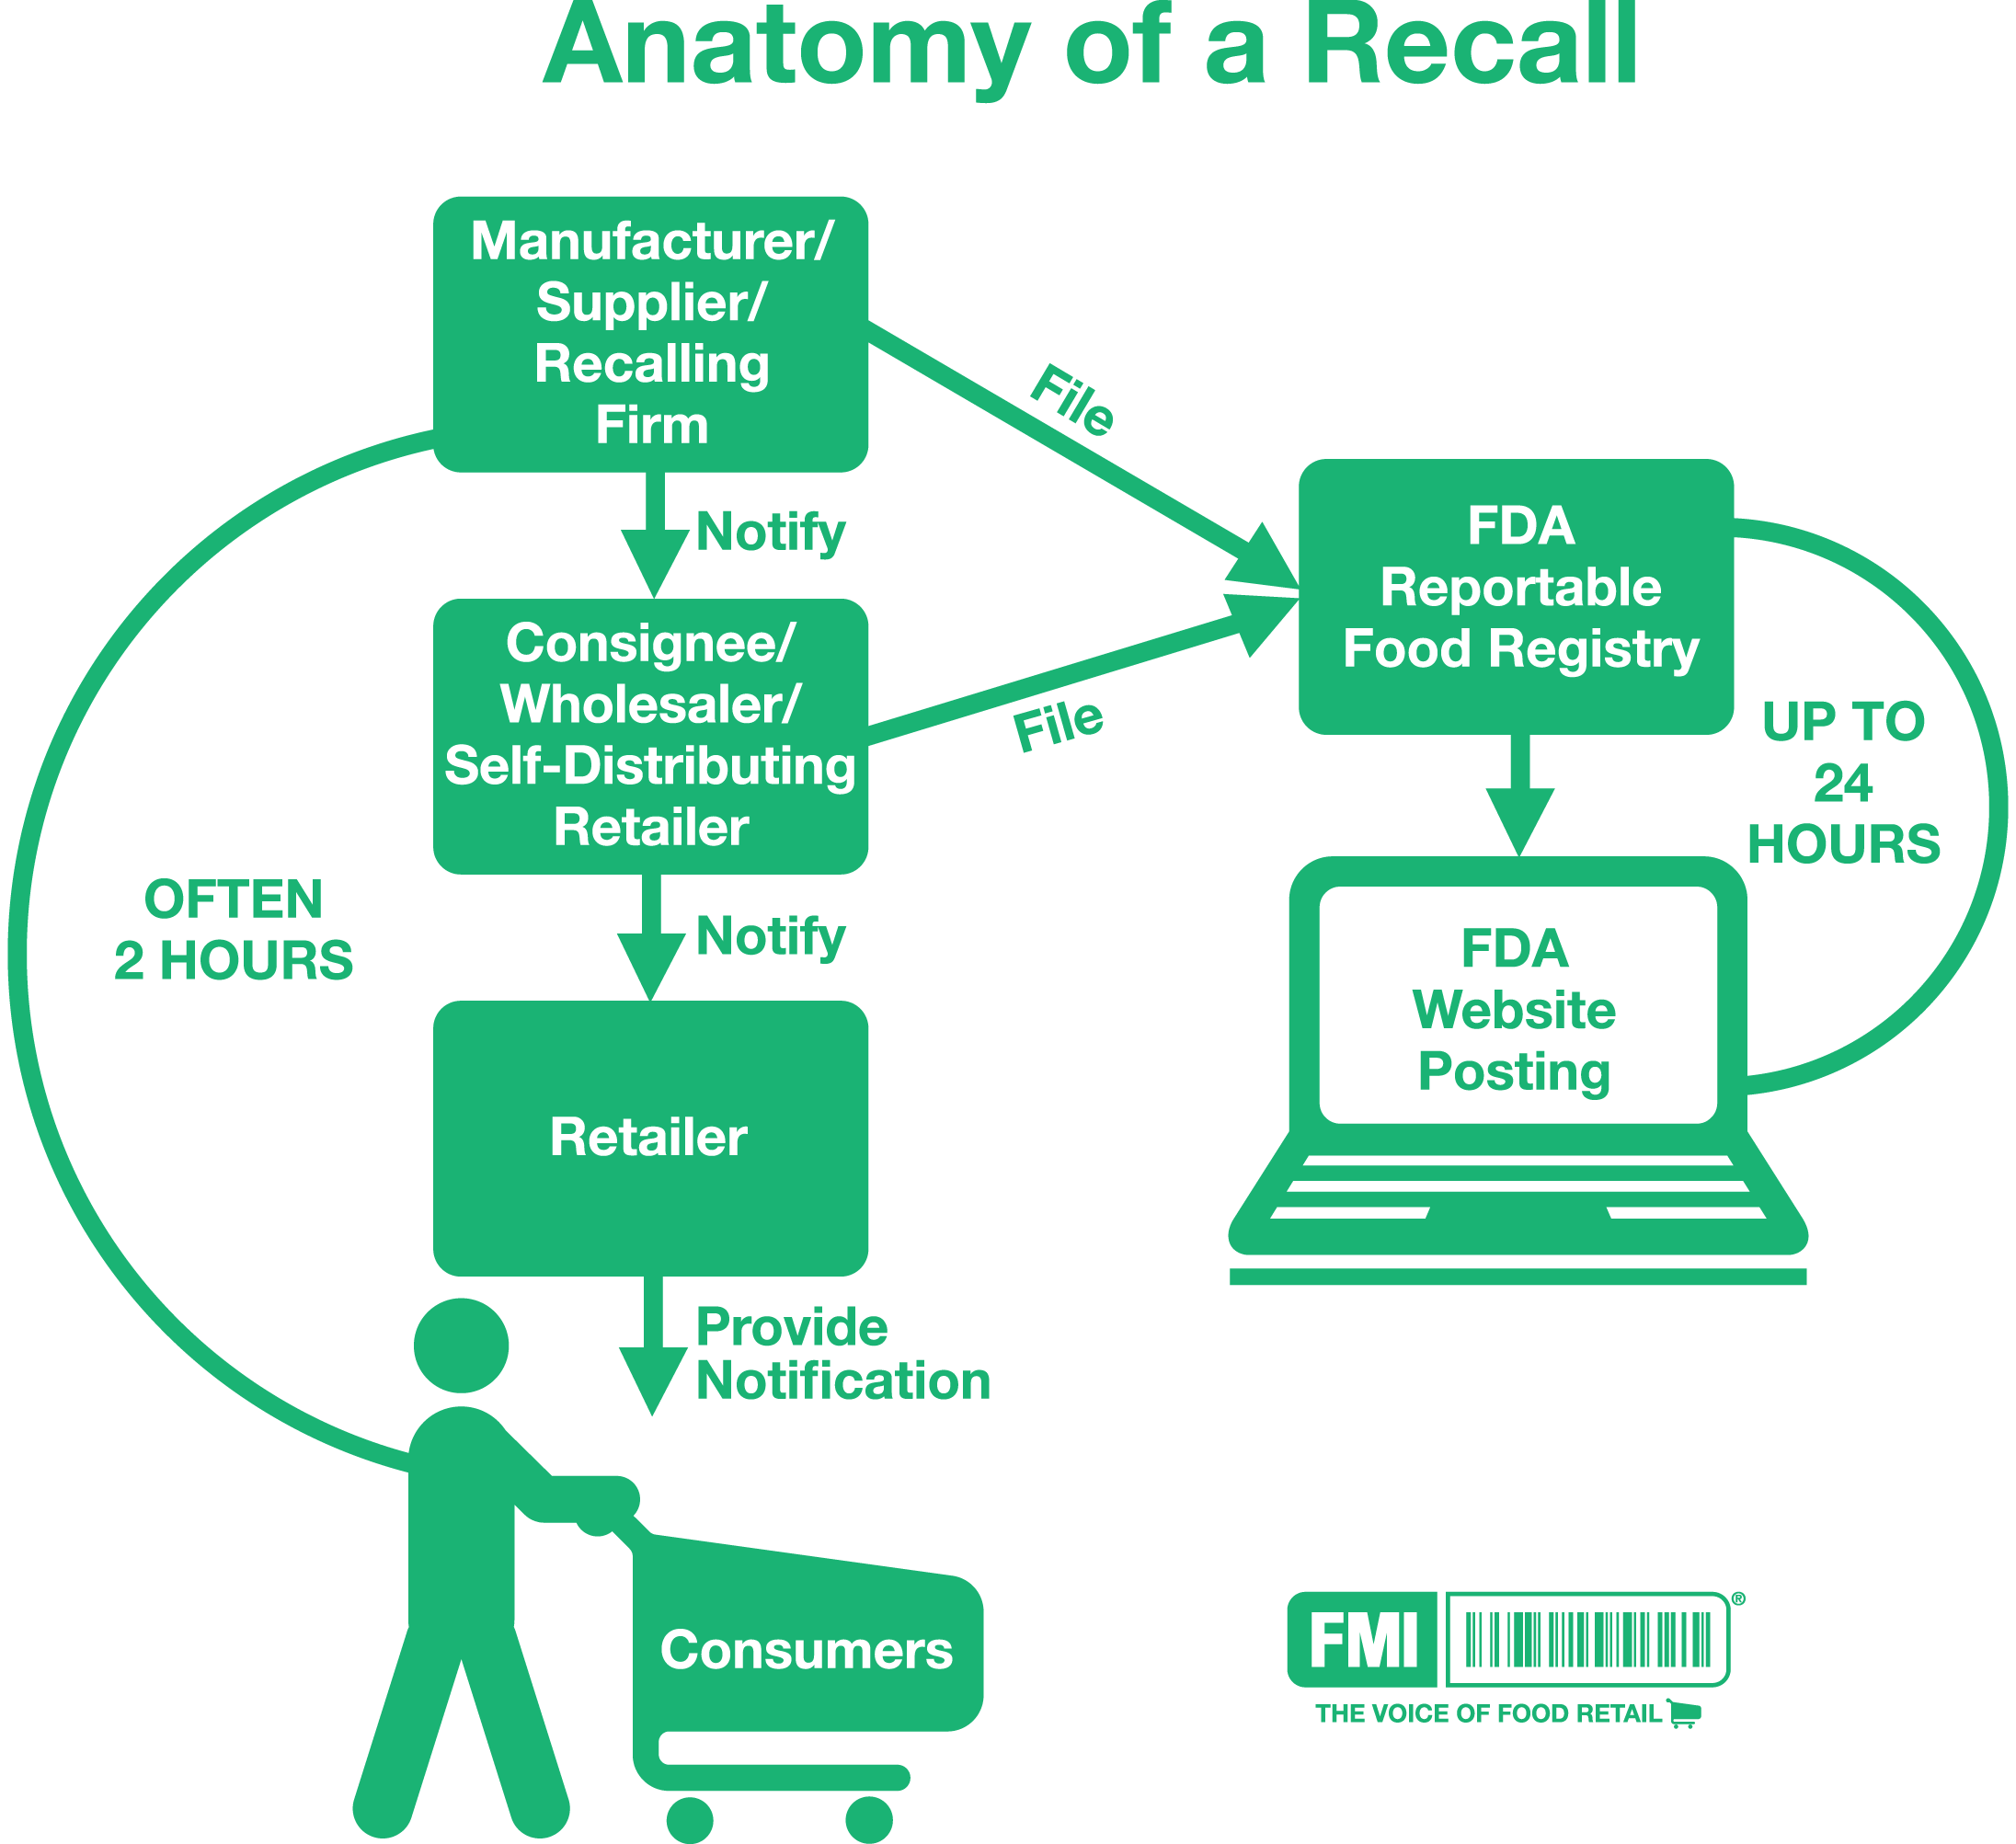 https://www.fmi.org/images/default-source/newsroom/anatomy-of-a-recall.png?sfvrsn=7d63a86f_2